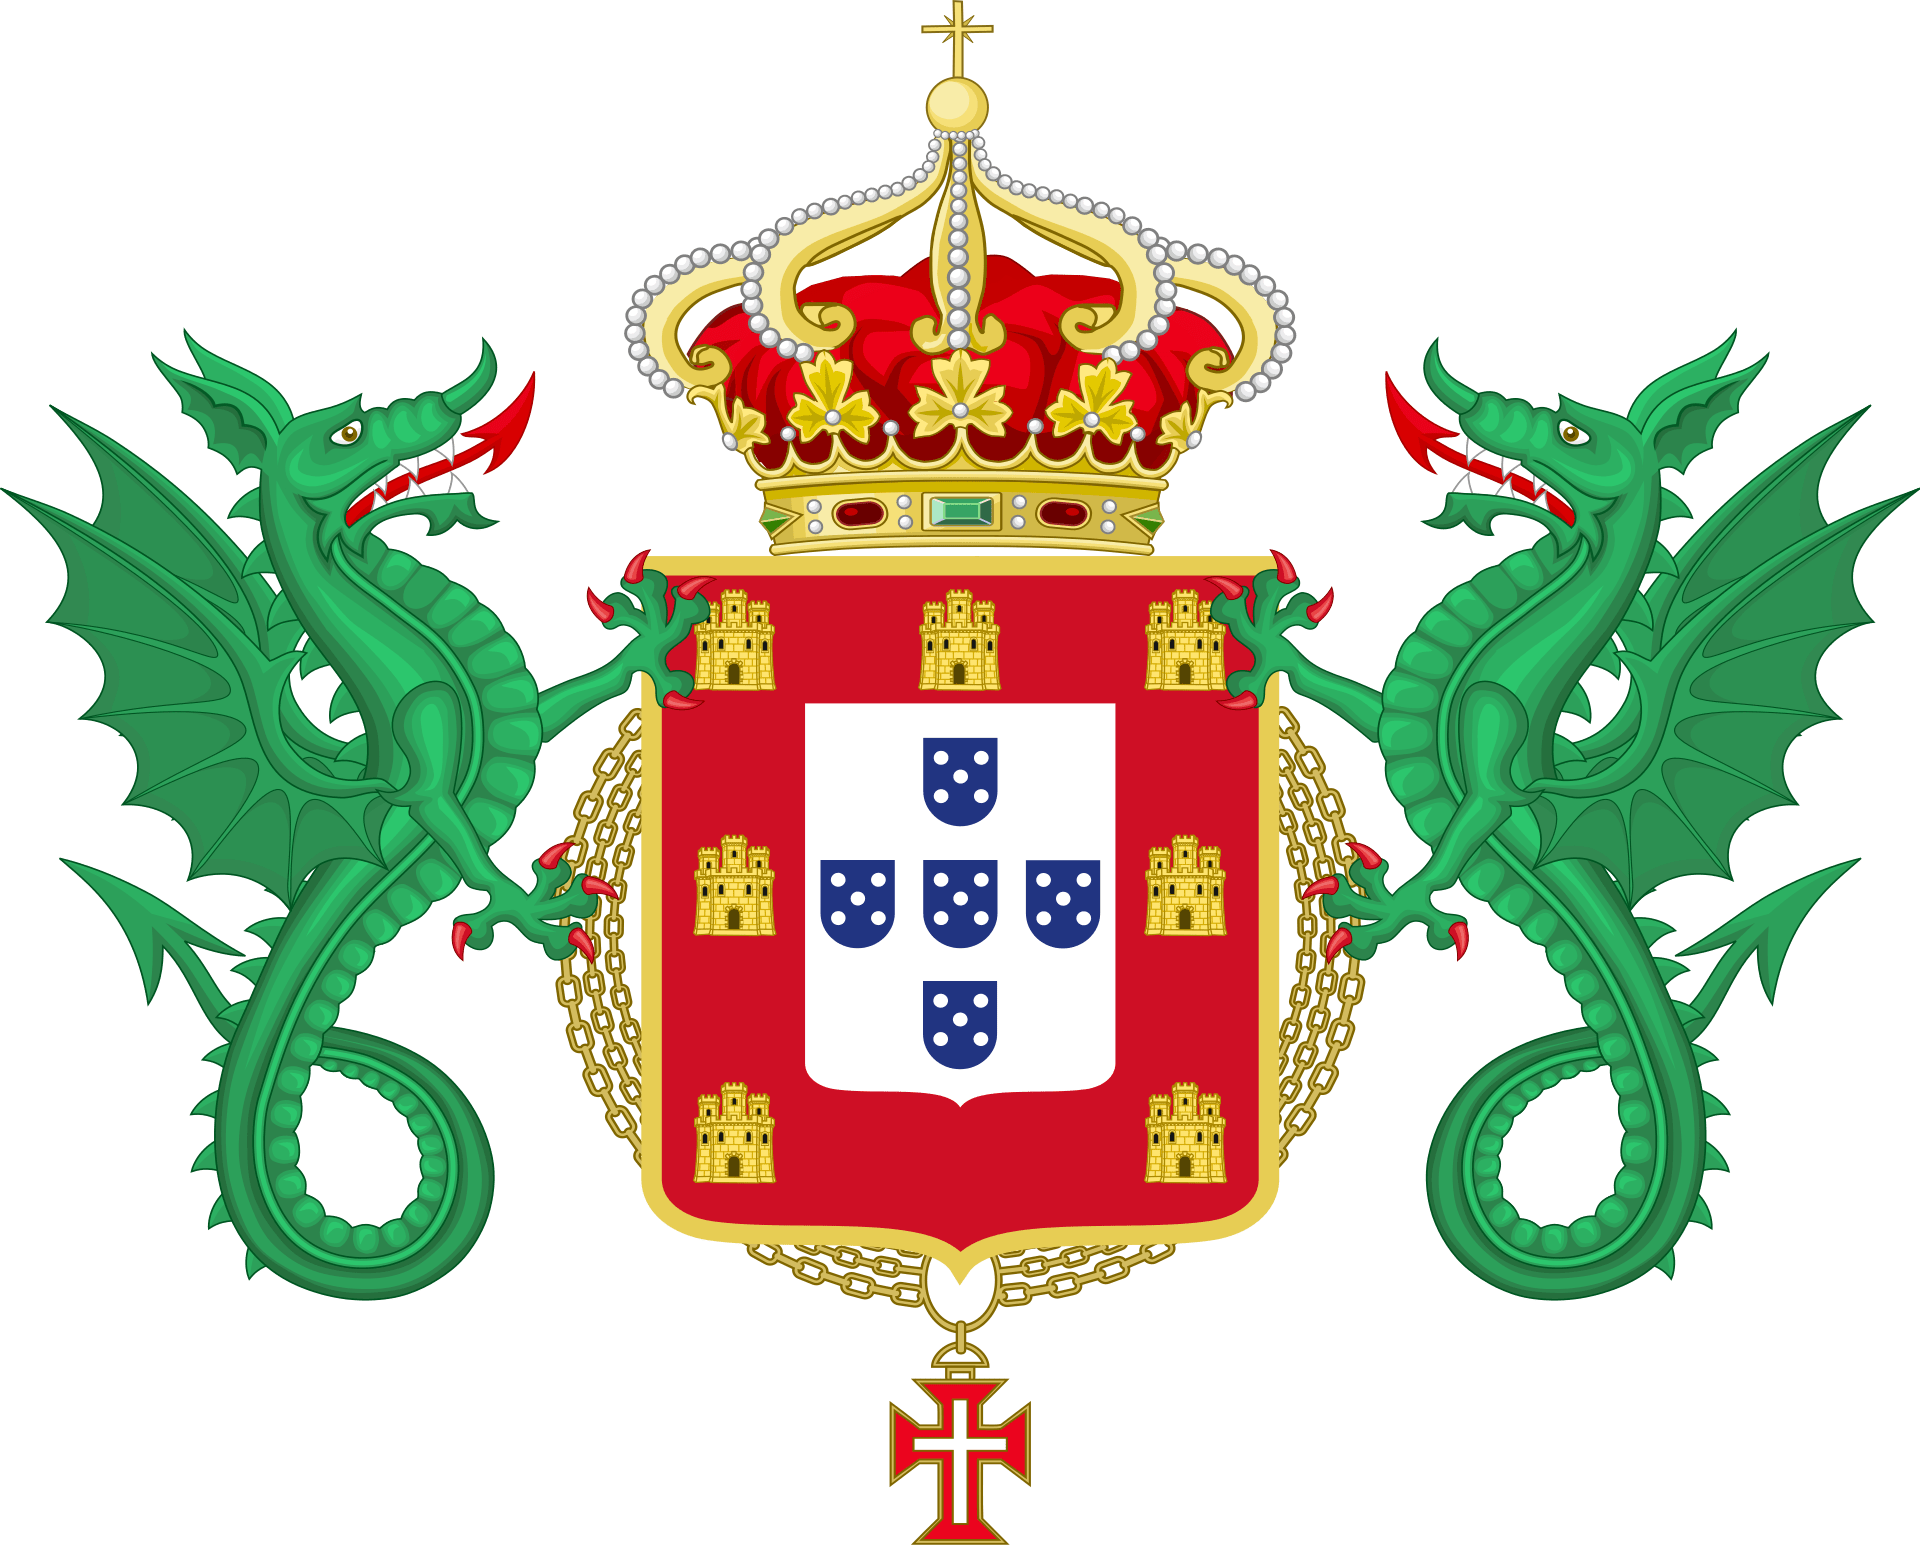 Coat of Arms of the Kingdom of Portugal 1640-1910